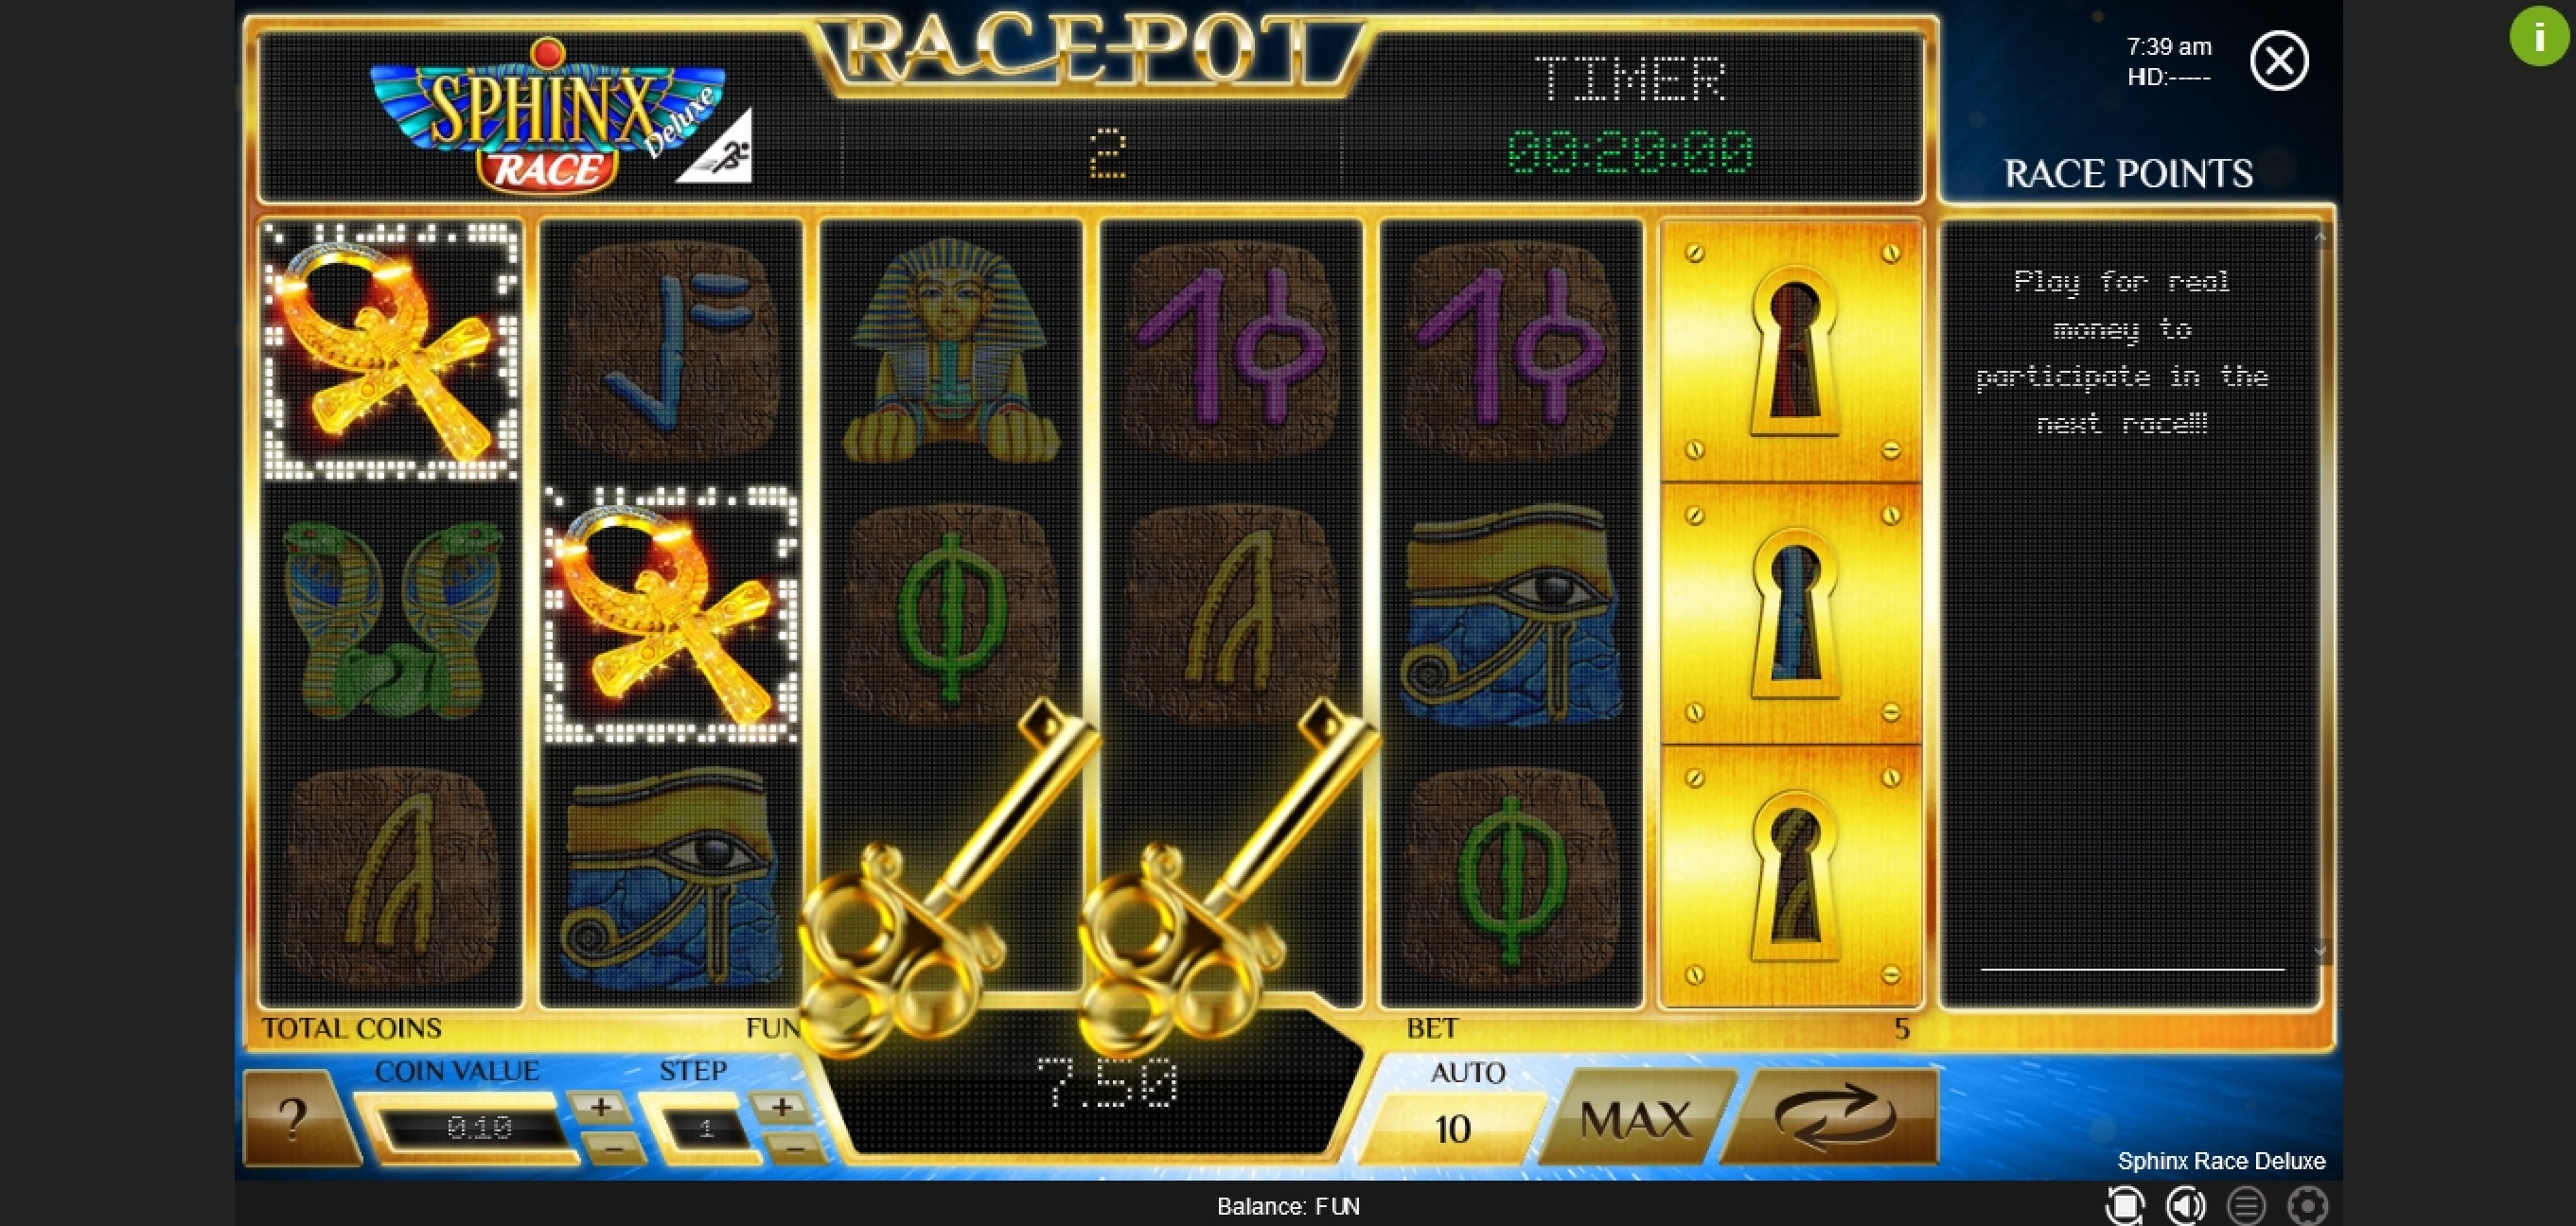 Win Money in Sphinx Race Deluxe Free Slot Game by Espresso Games